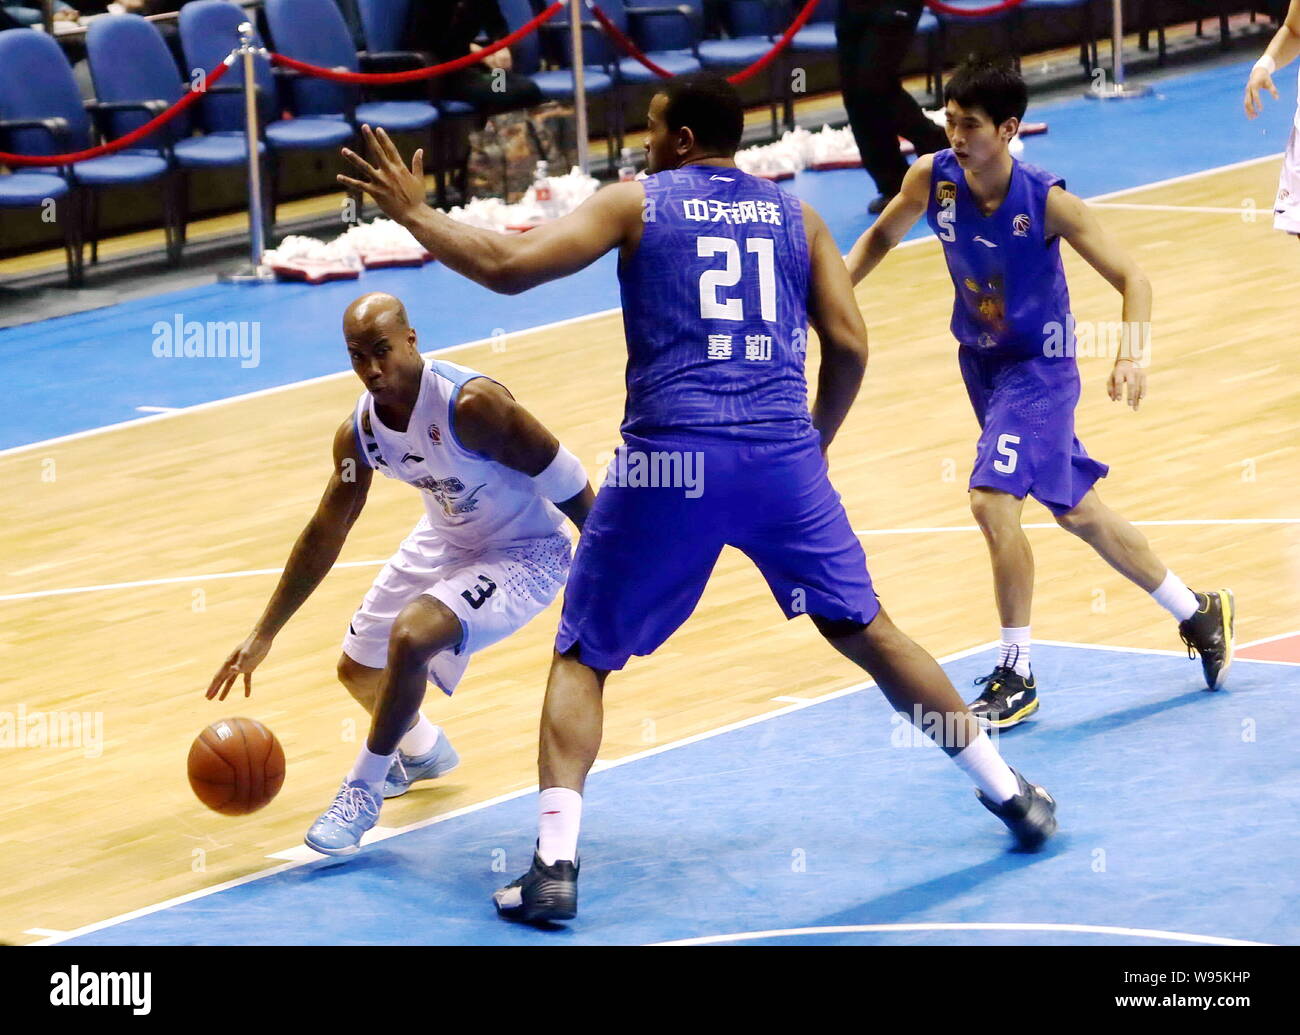 Stephon Marbury of the Beijing Ducks, left, challenges Garret Siler of the Jiangsu Dragons in their 11th round match during the 2012/2013 CBA season i Stock Photo